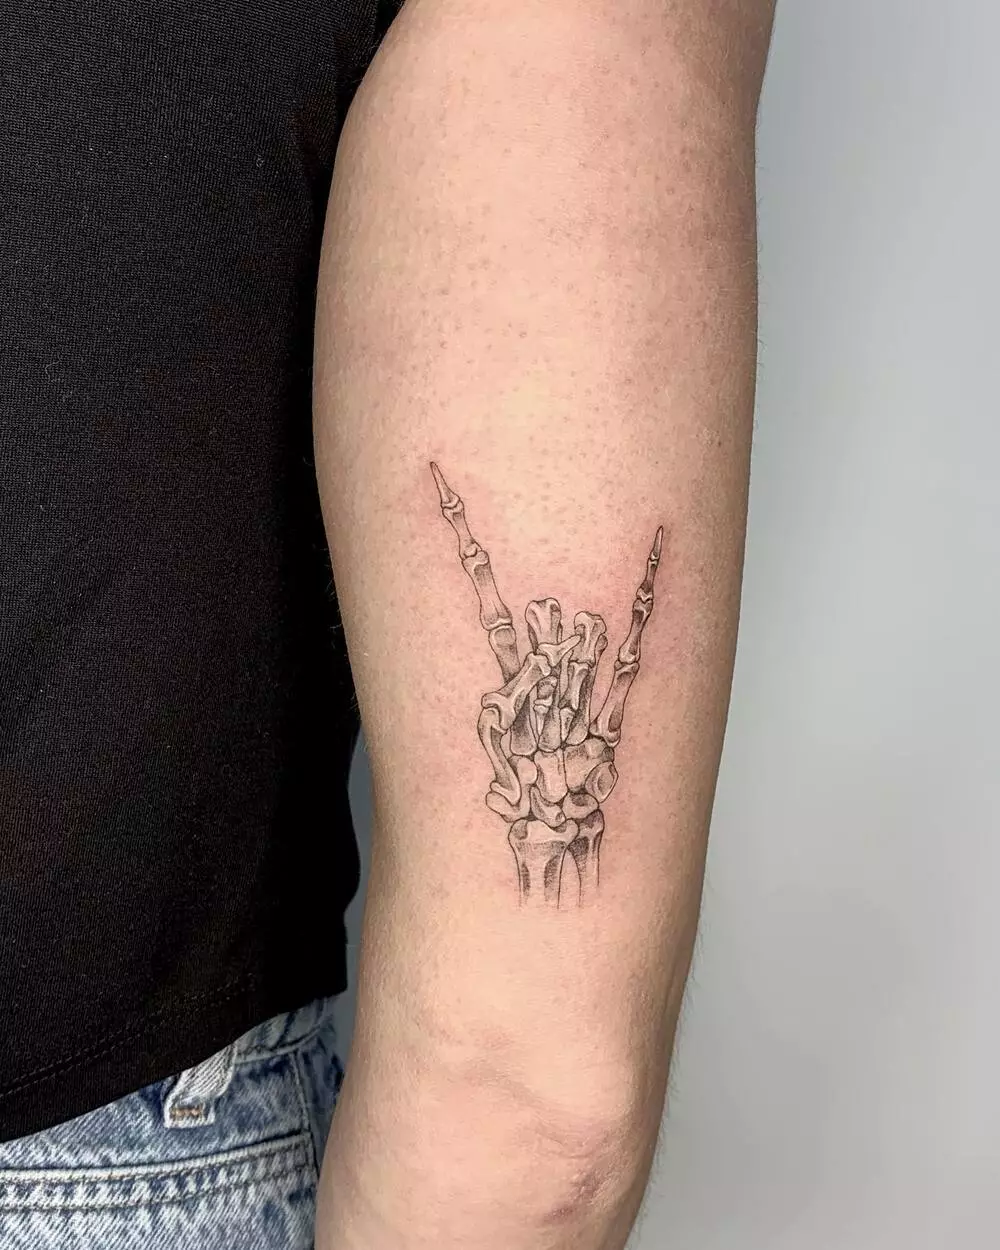 A Close-up Image of Small Skeleton Rock On Hand Tattoo on Arm